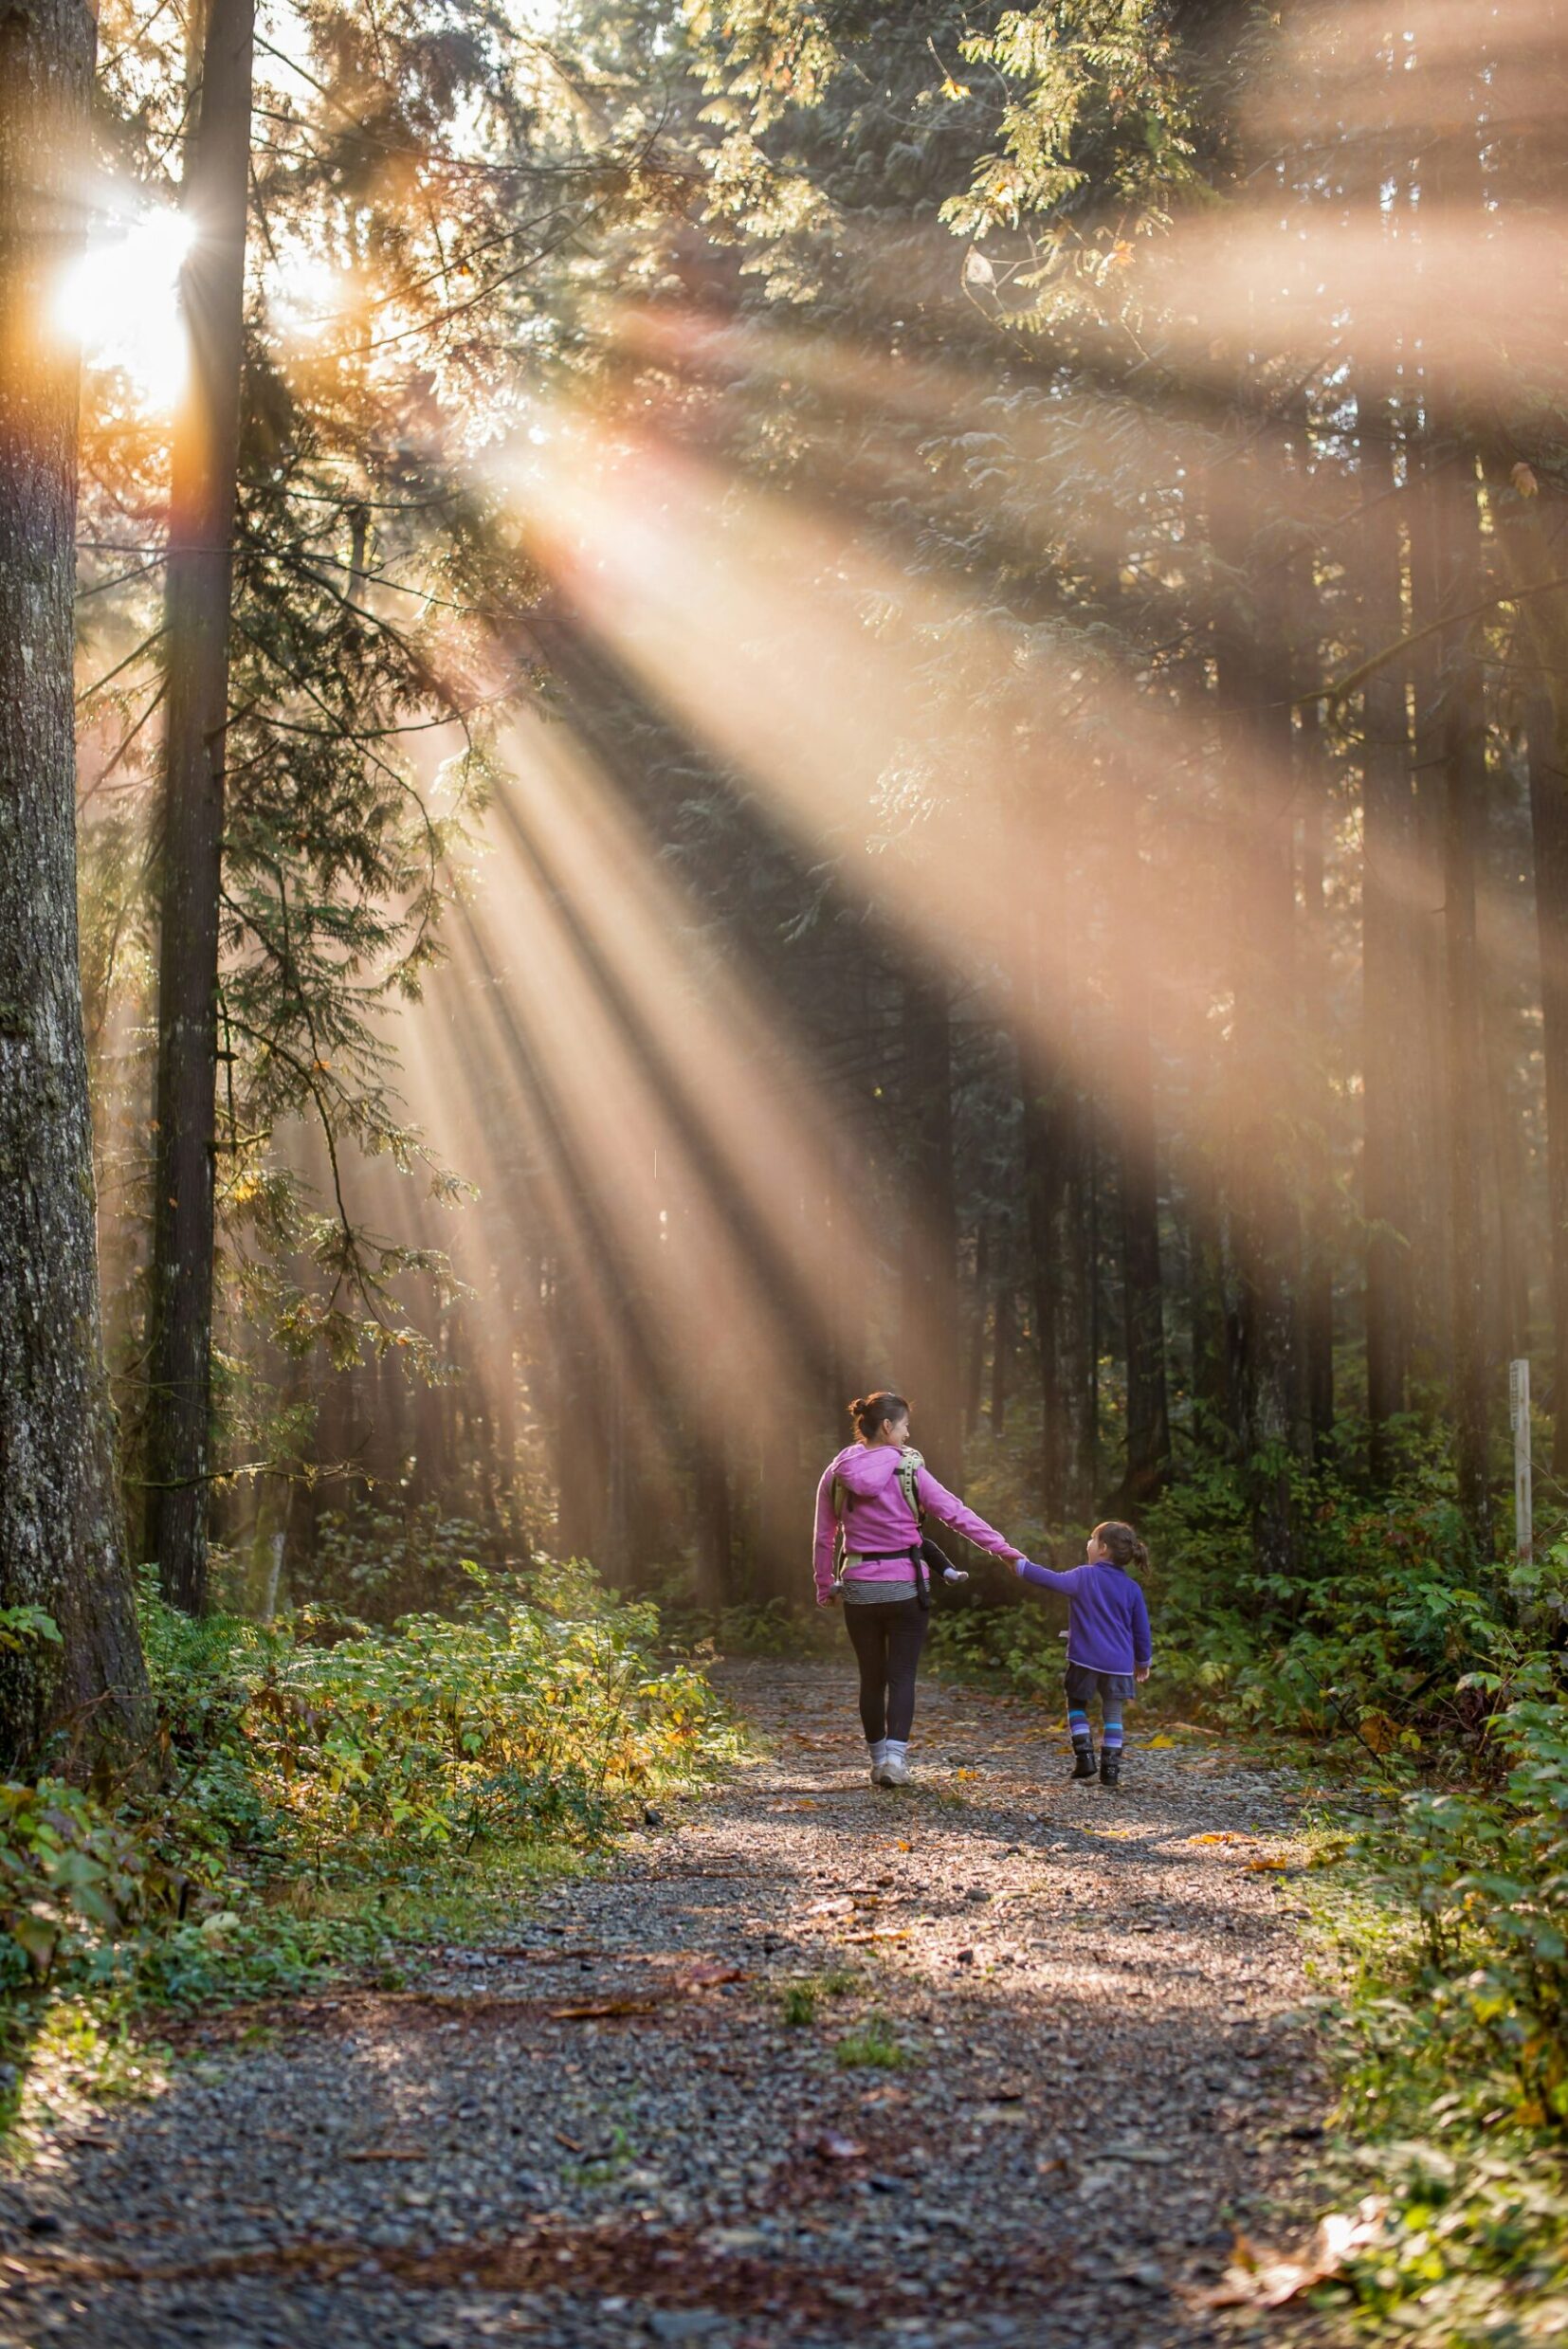 An image of a mother an child walking in nature representing how holistic therapy can help heal from dysfunctional family roles